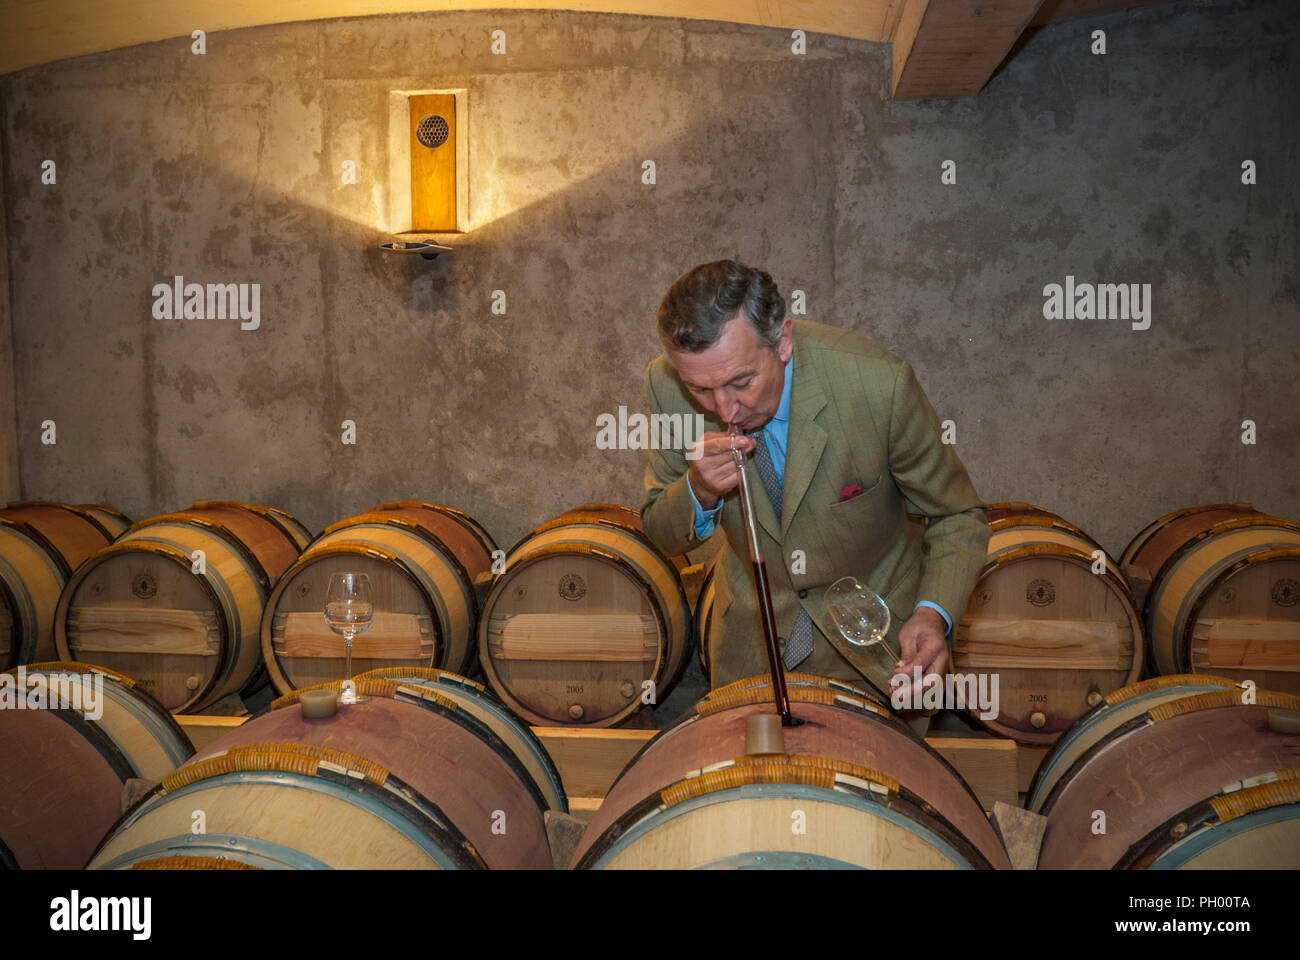 Jacques Thienpont in his Château Le Pin wine barrel cellar, drawing a tasting glass from barrel of his renowned 'Chateau Le Pin’ Bordeaux fine wine appellation Pomerol France Stock Photo